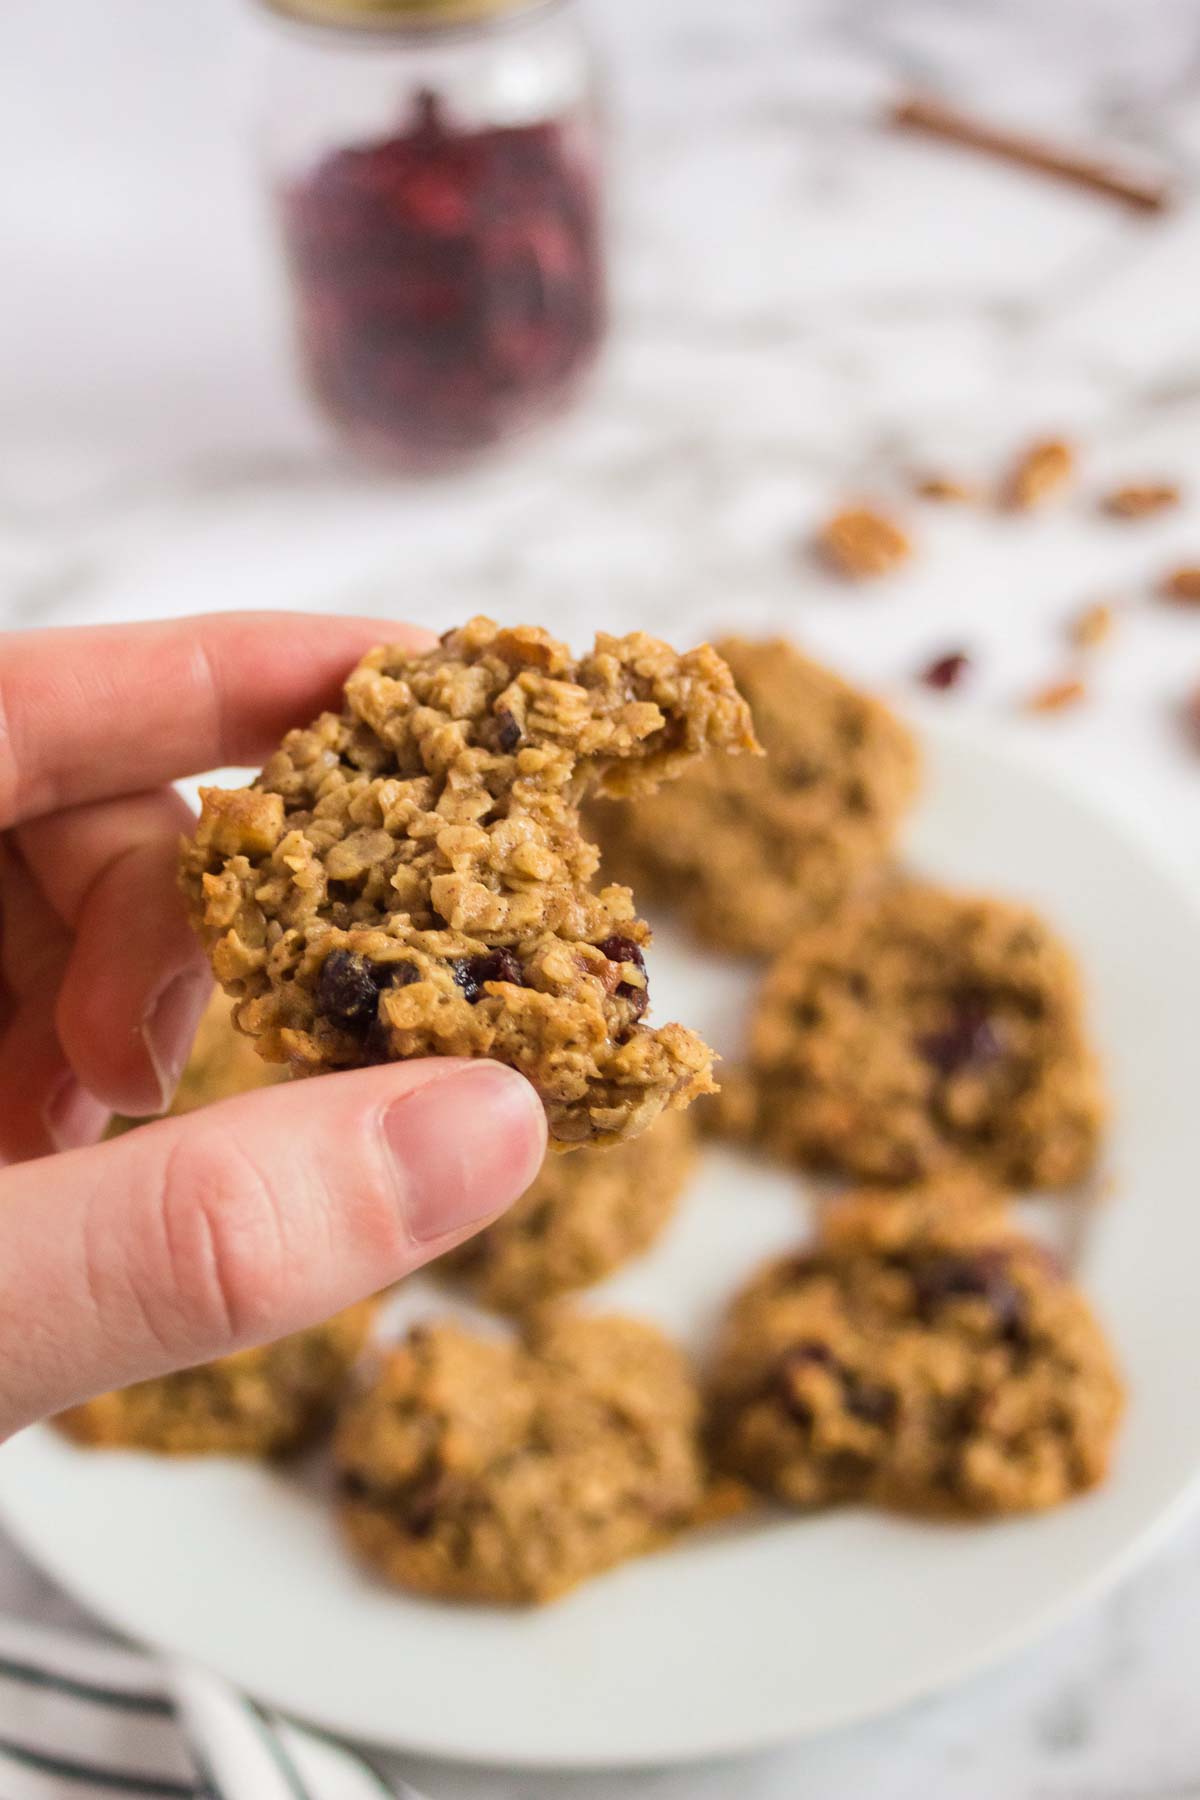 Hand holding oatmeal craisin cookie